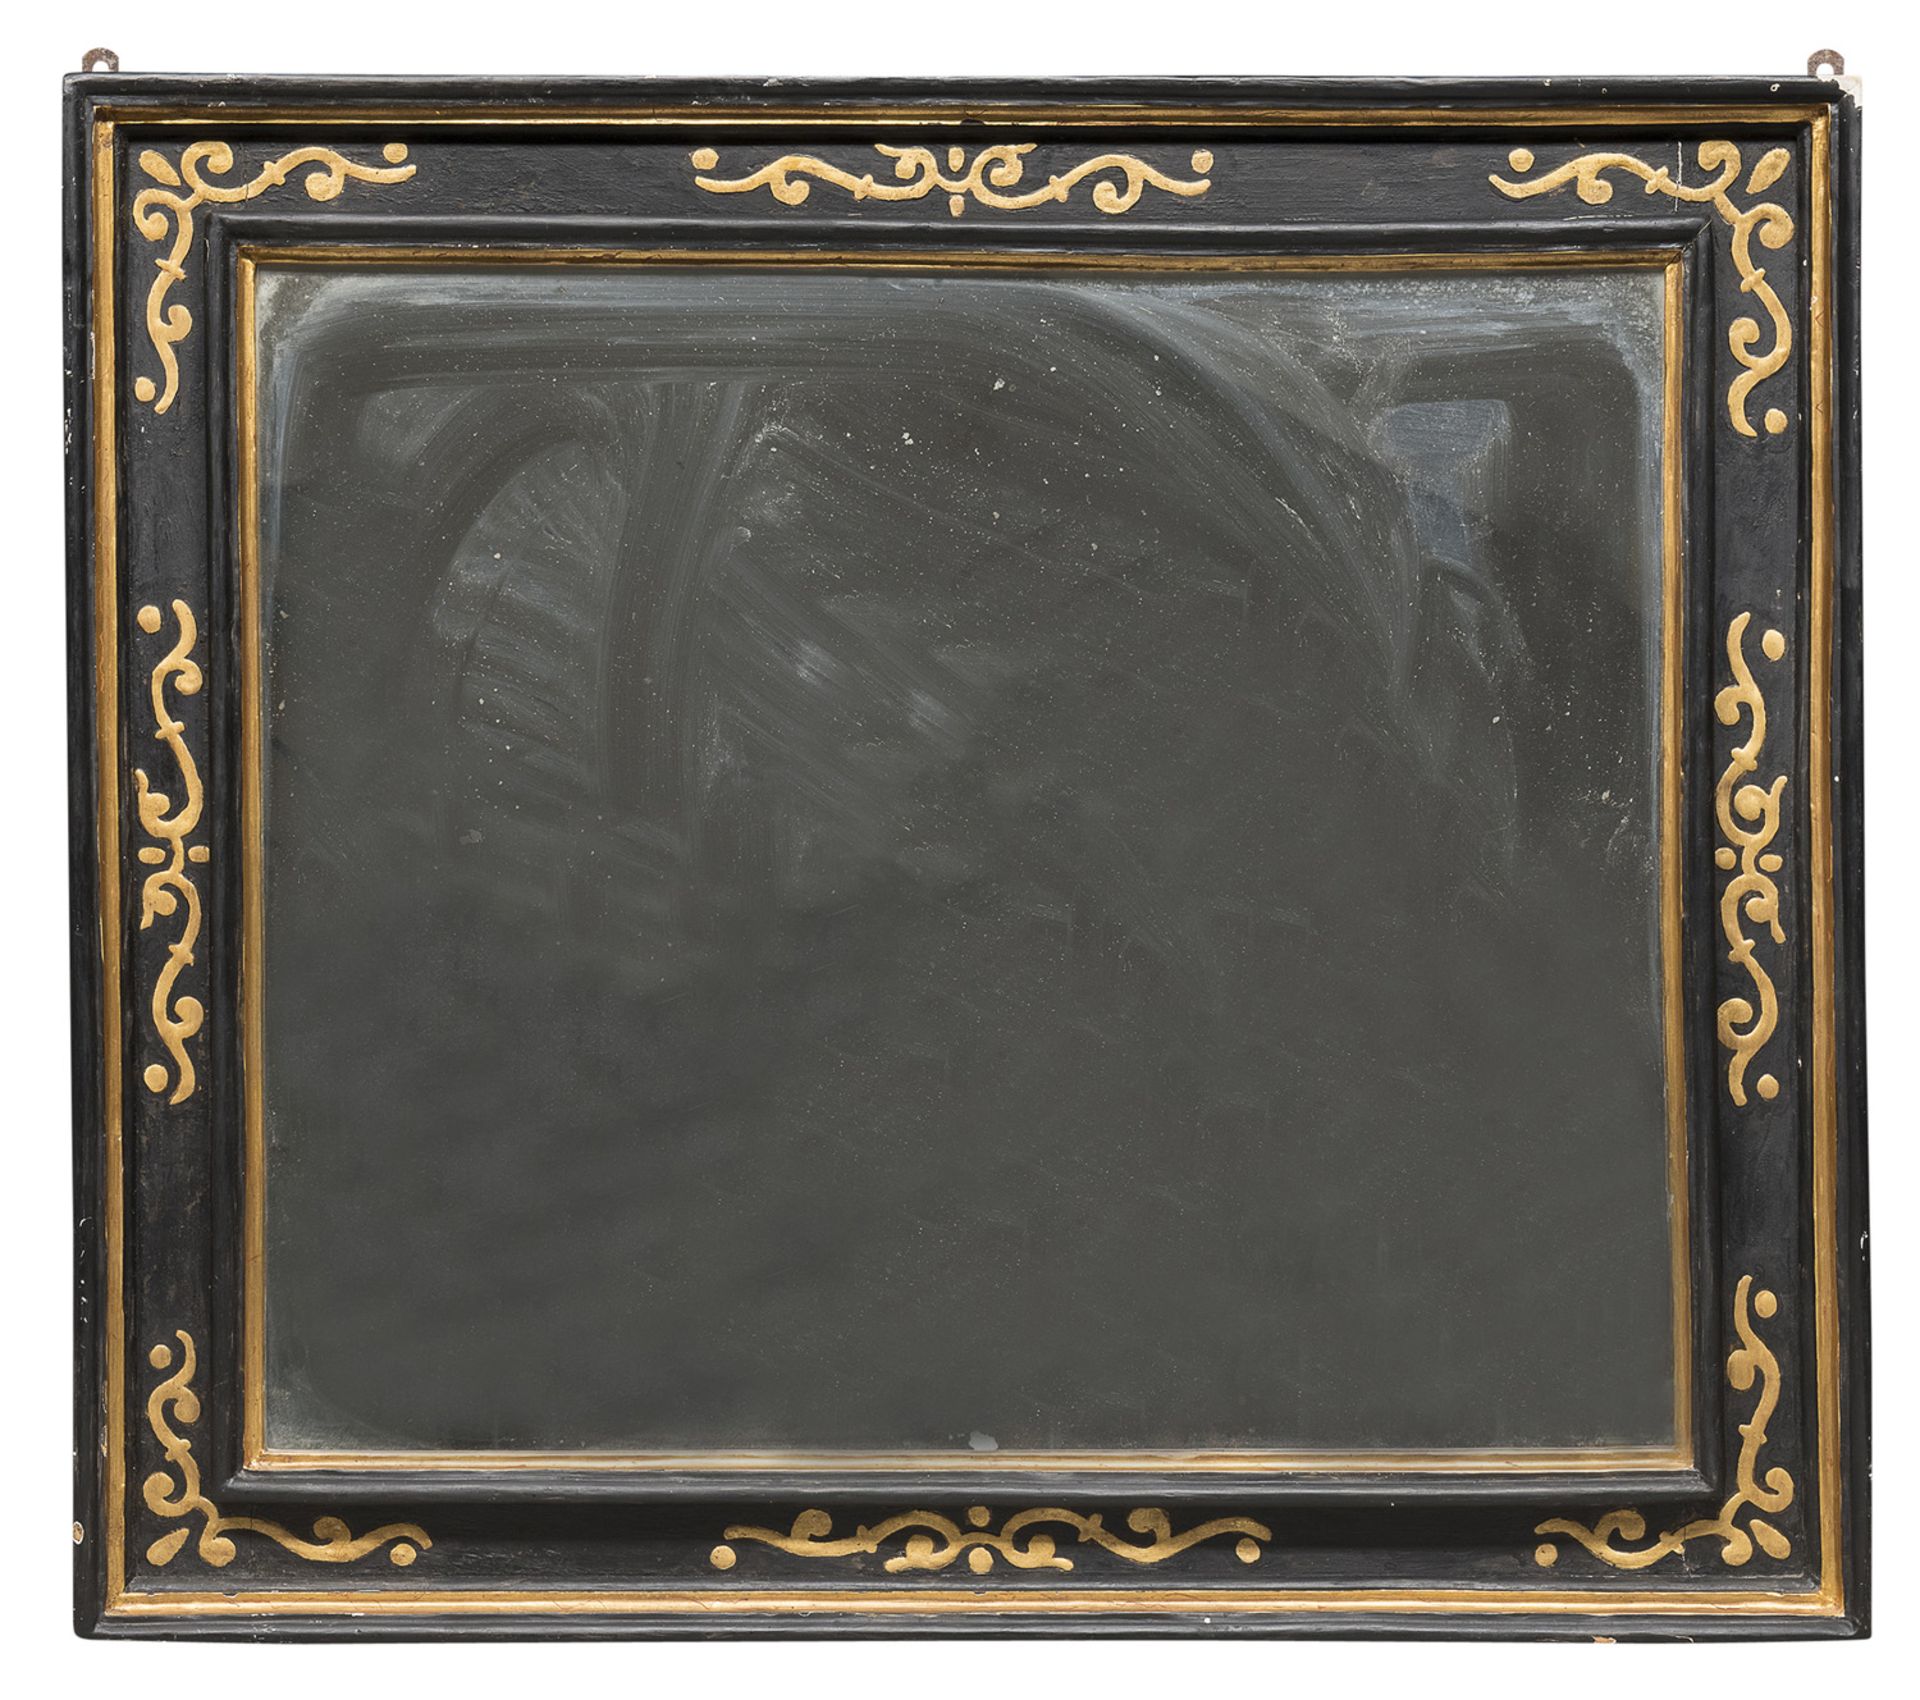 WOODEN MIRROR IN BLACK AND GOLD LACQUER PROBABLY NAPLES 18TH CENTURY